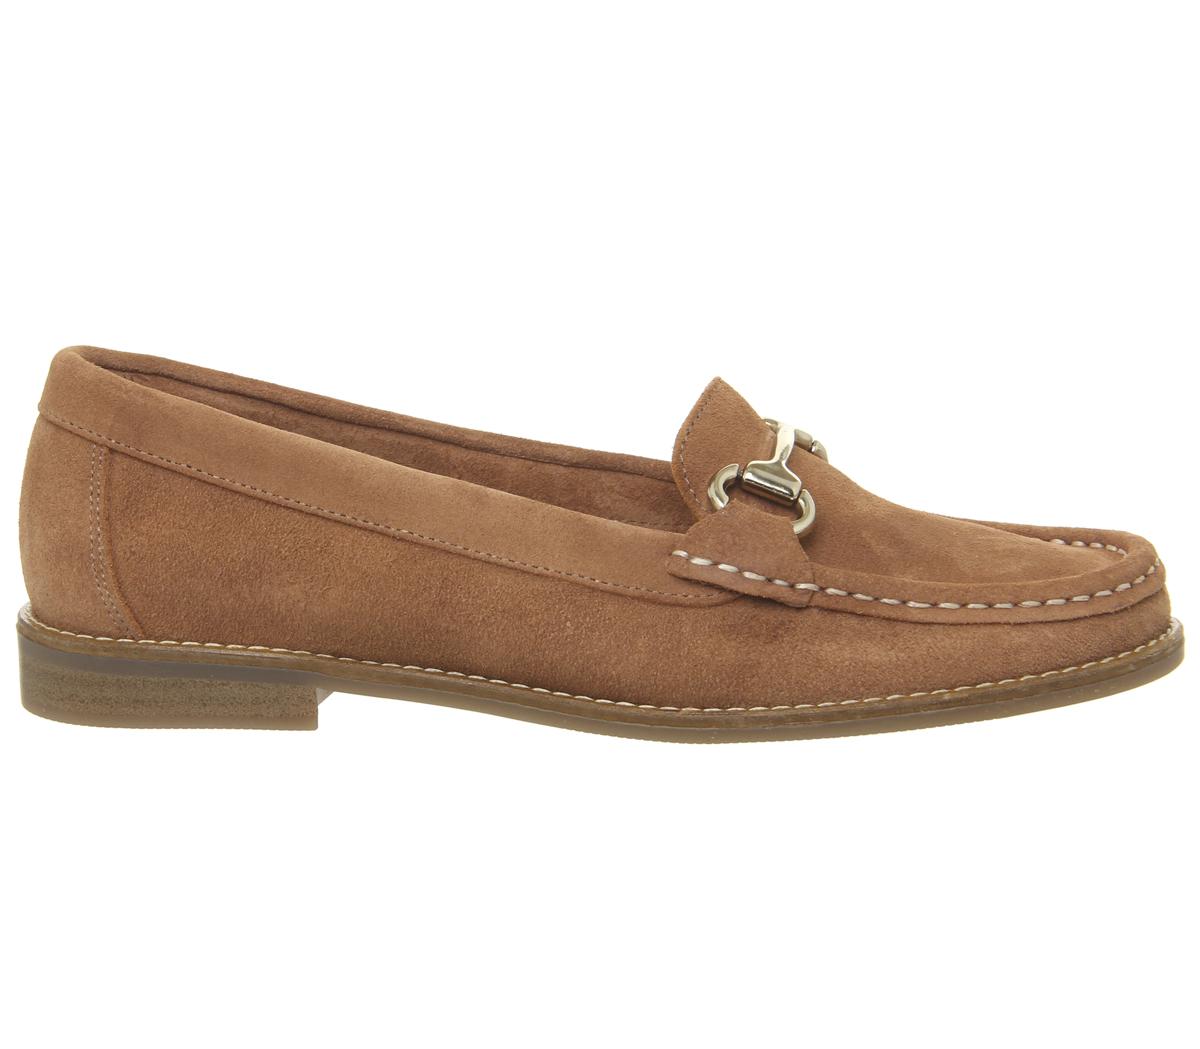 OFFICE First Class Trim Loafers Tan Suede - Flat Shoes for Women